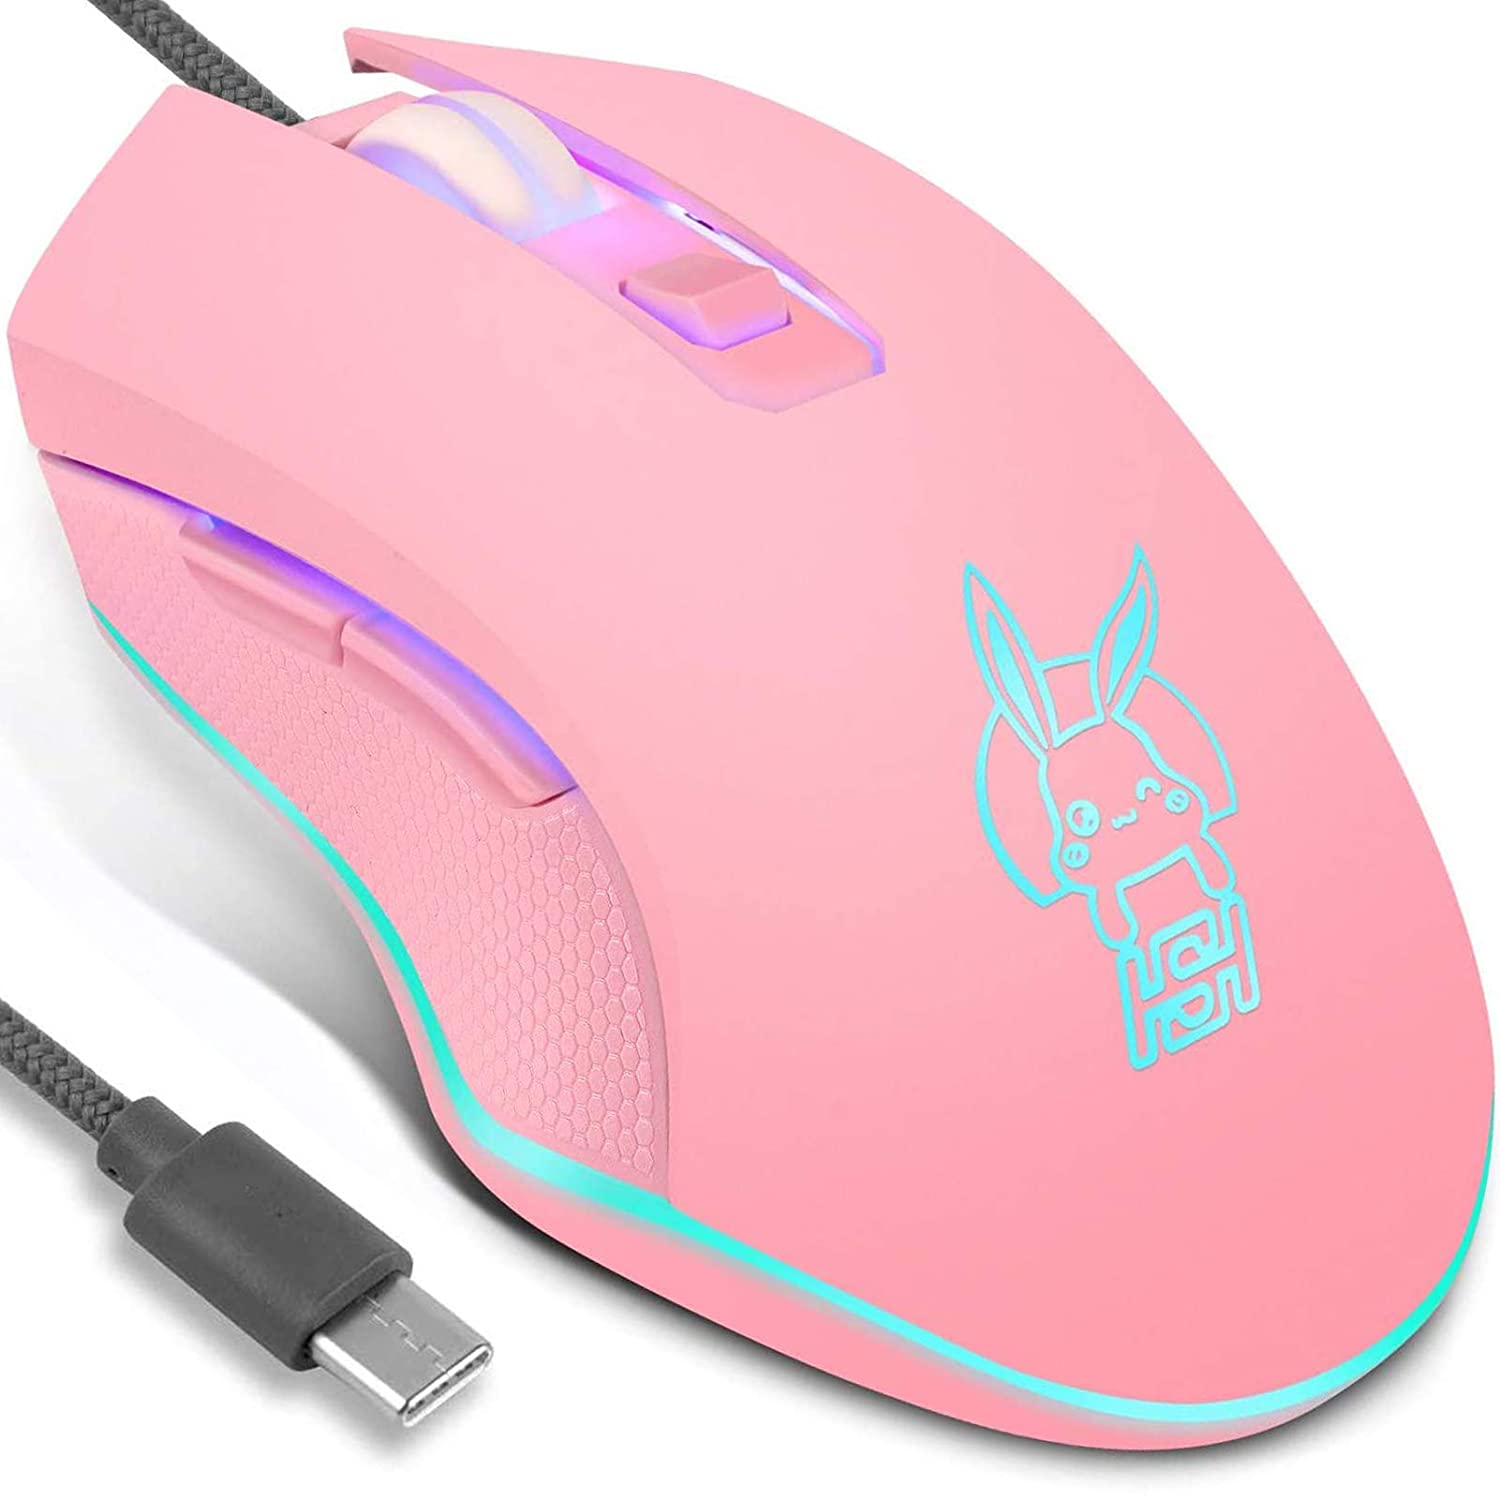 pink mouse - IULONEE USB Type C Wired Mouse